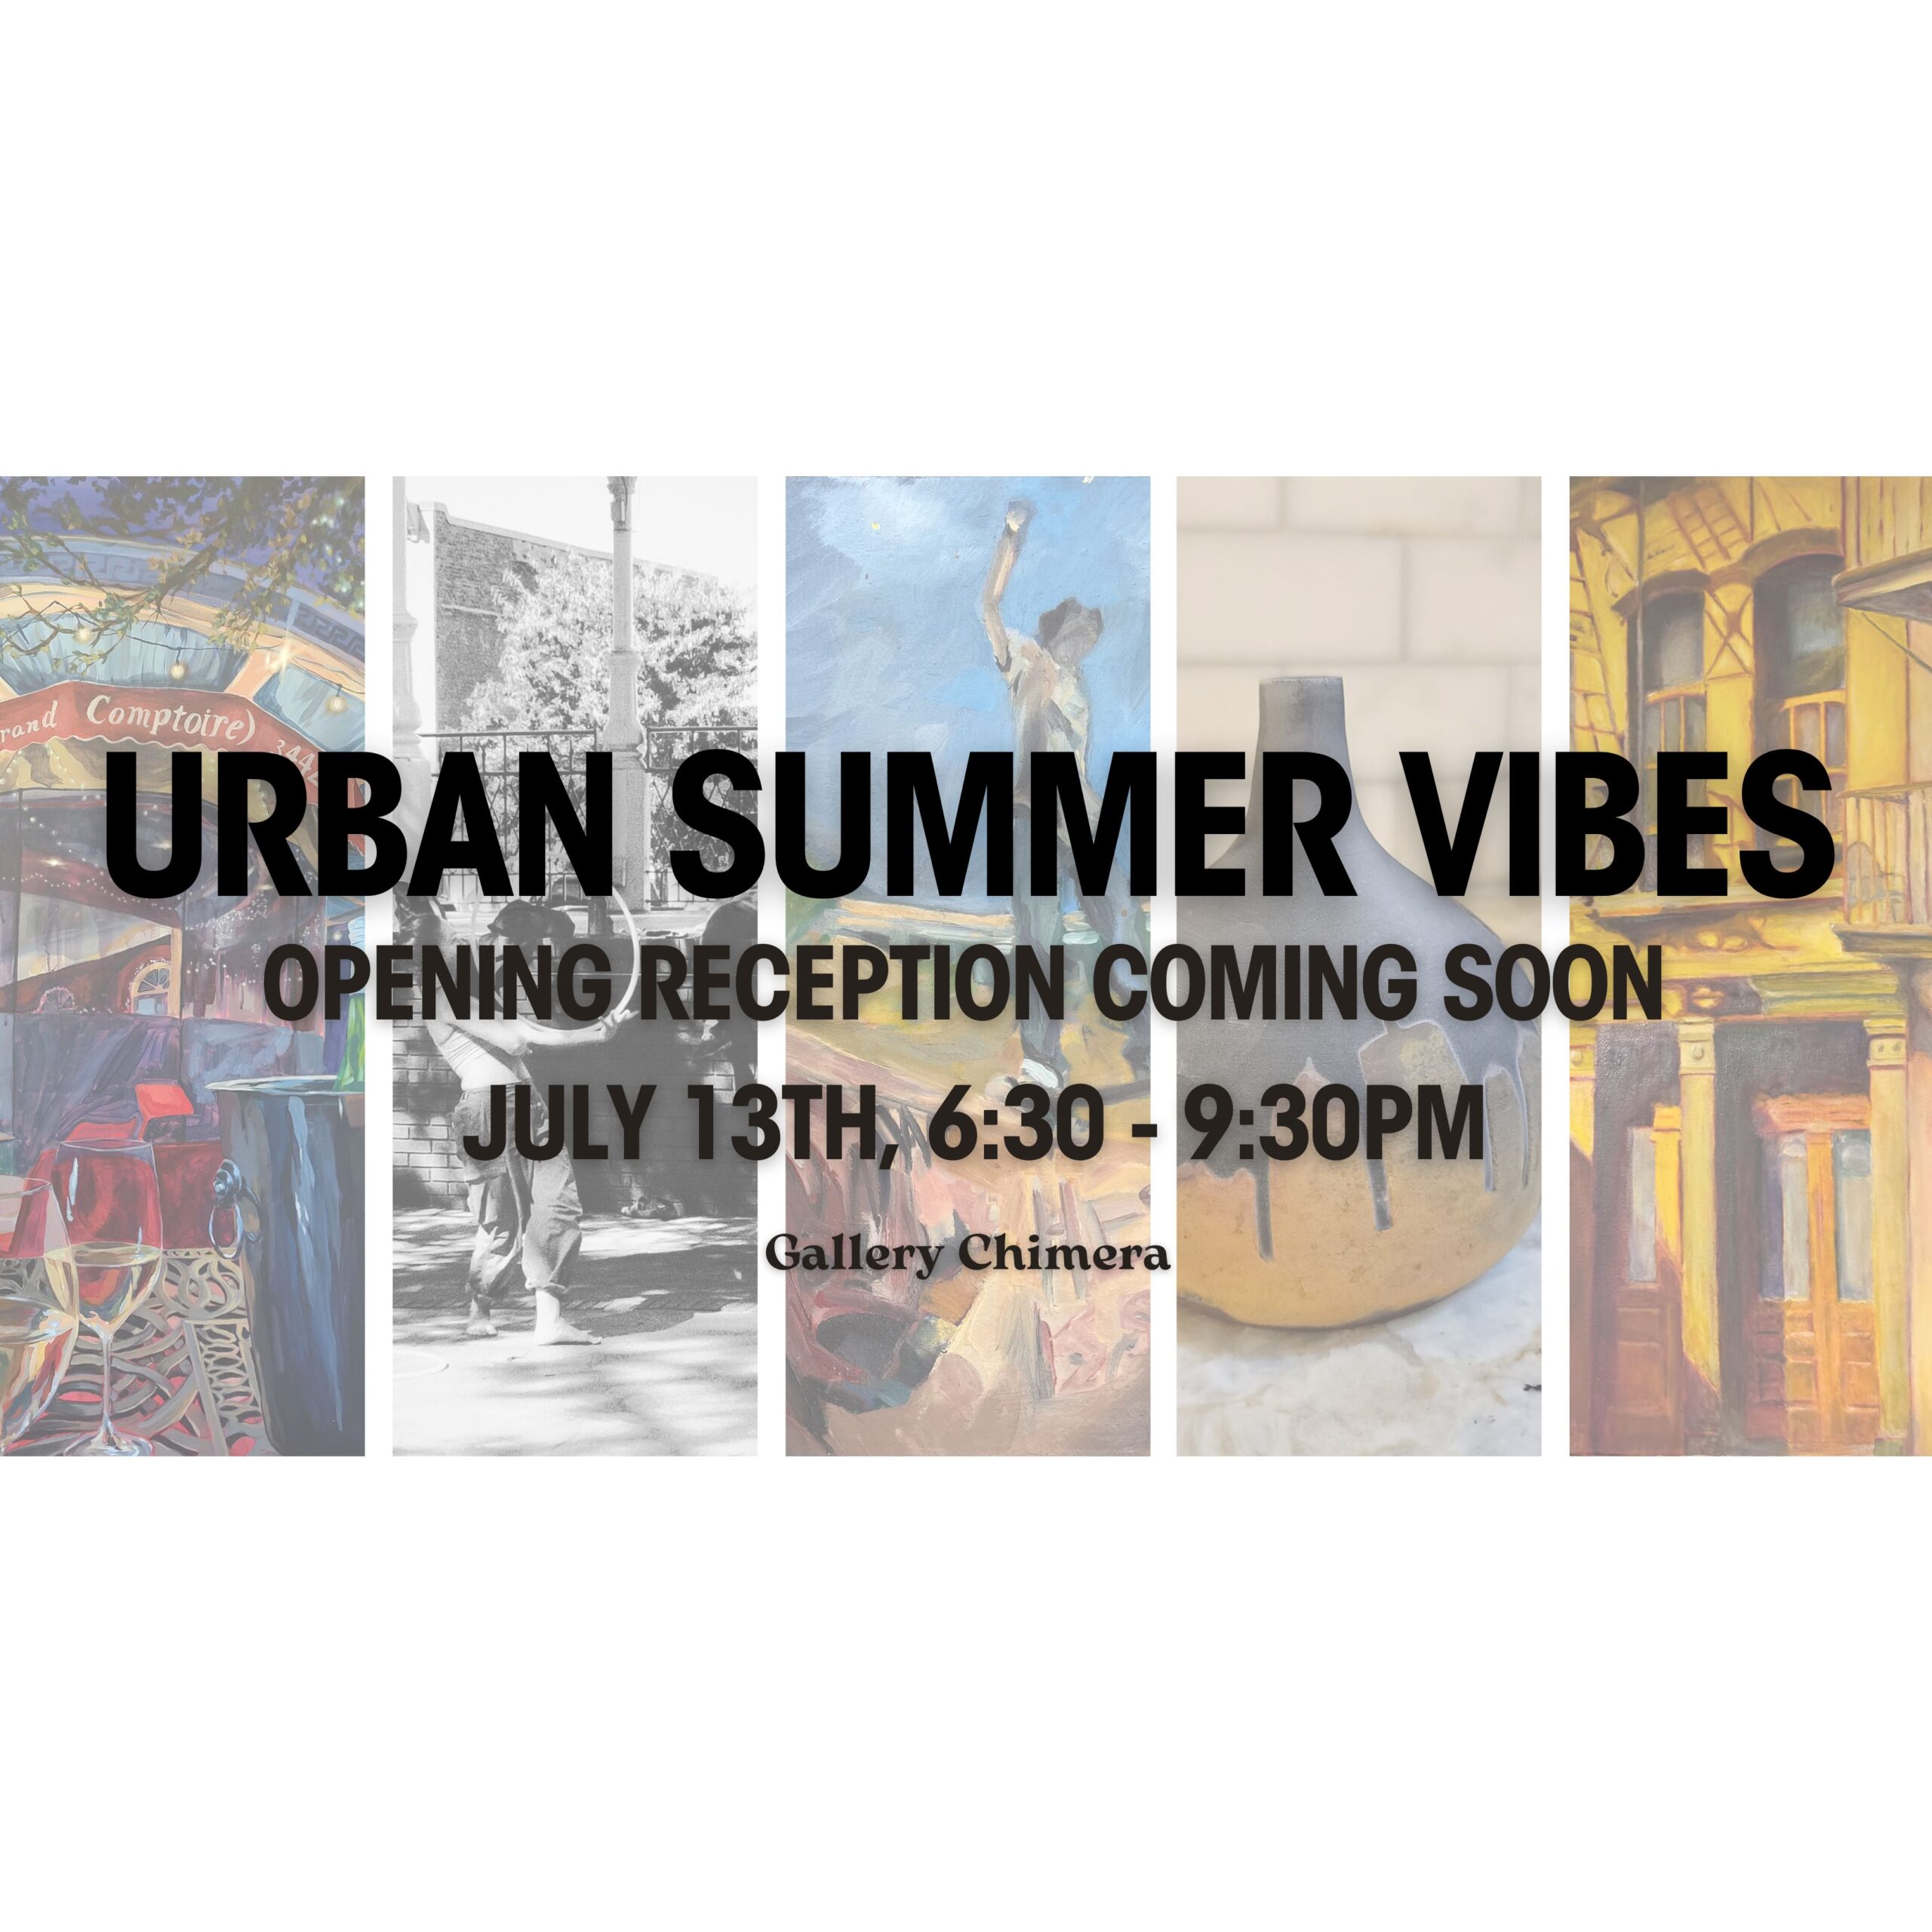 Opening Reception coming soon July 13th, 630 - 930pm